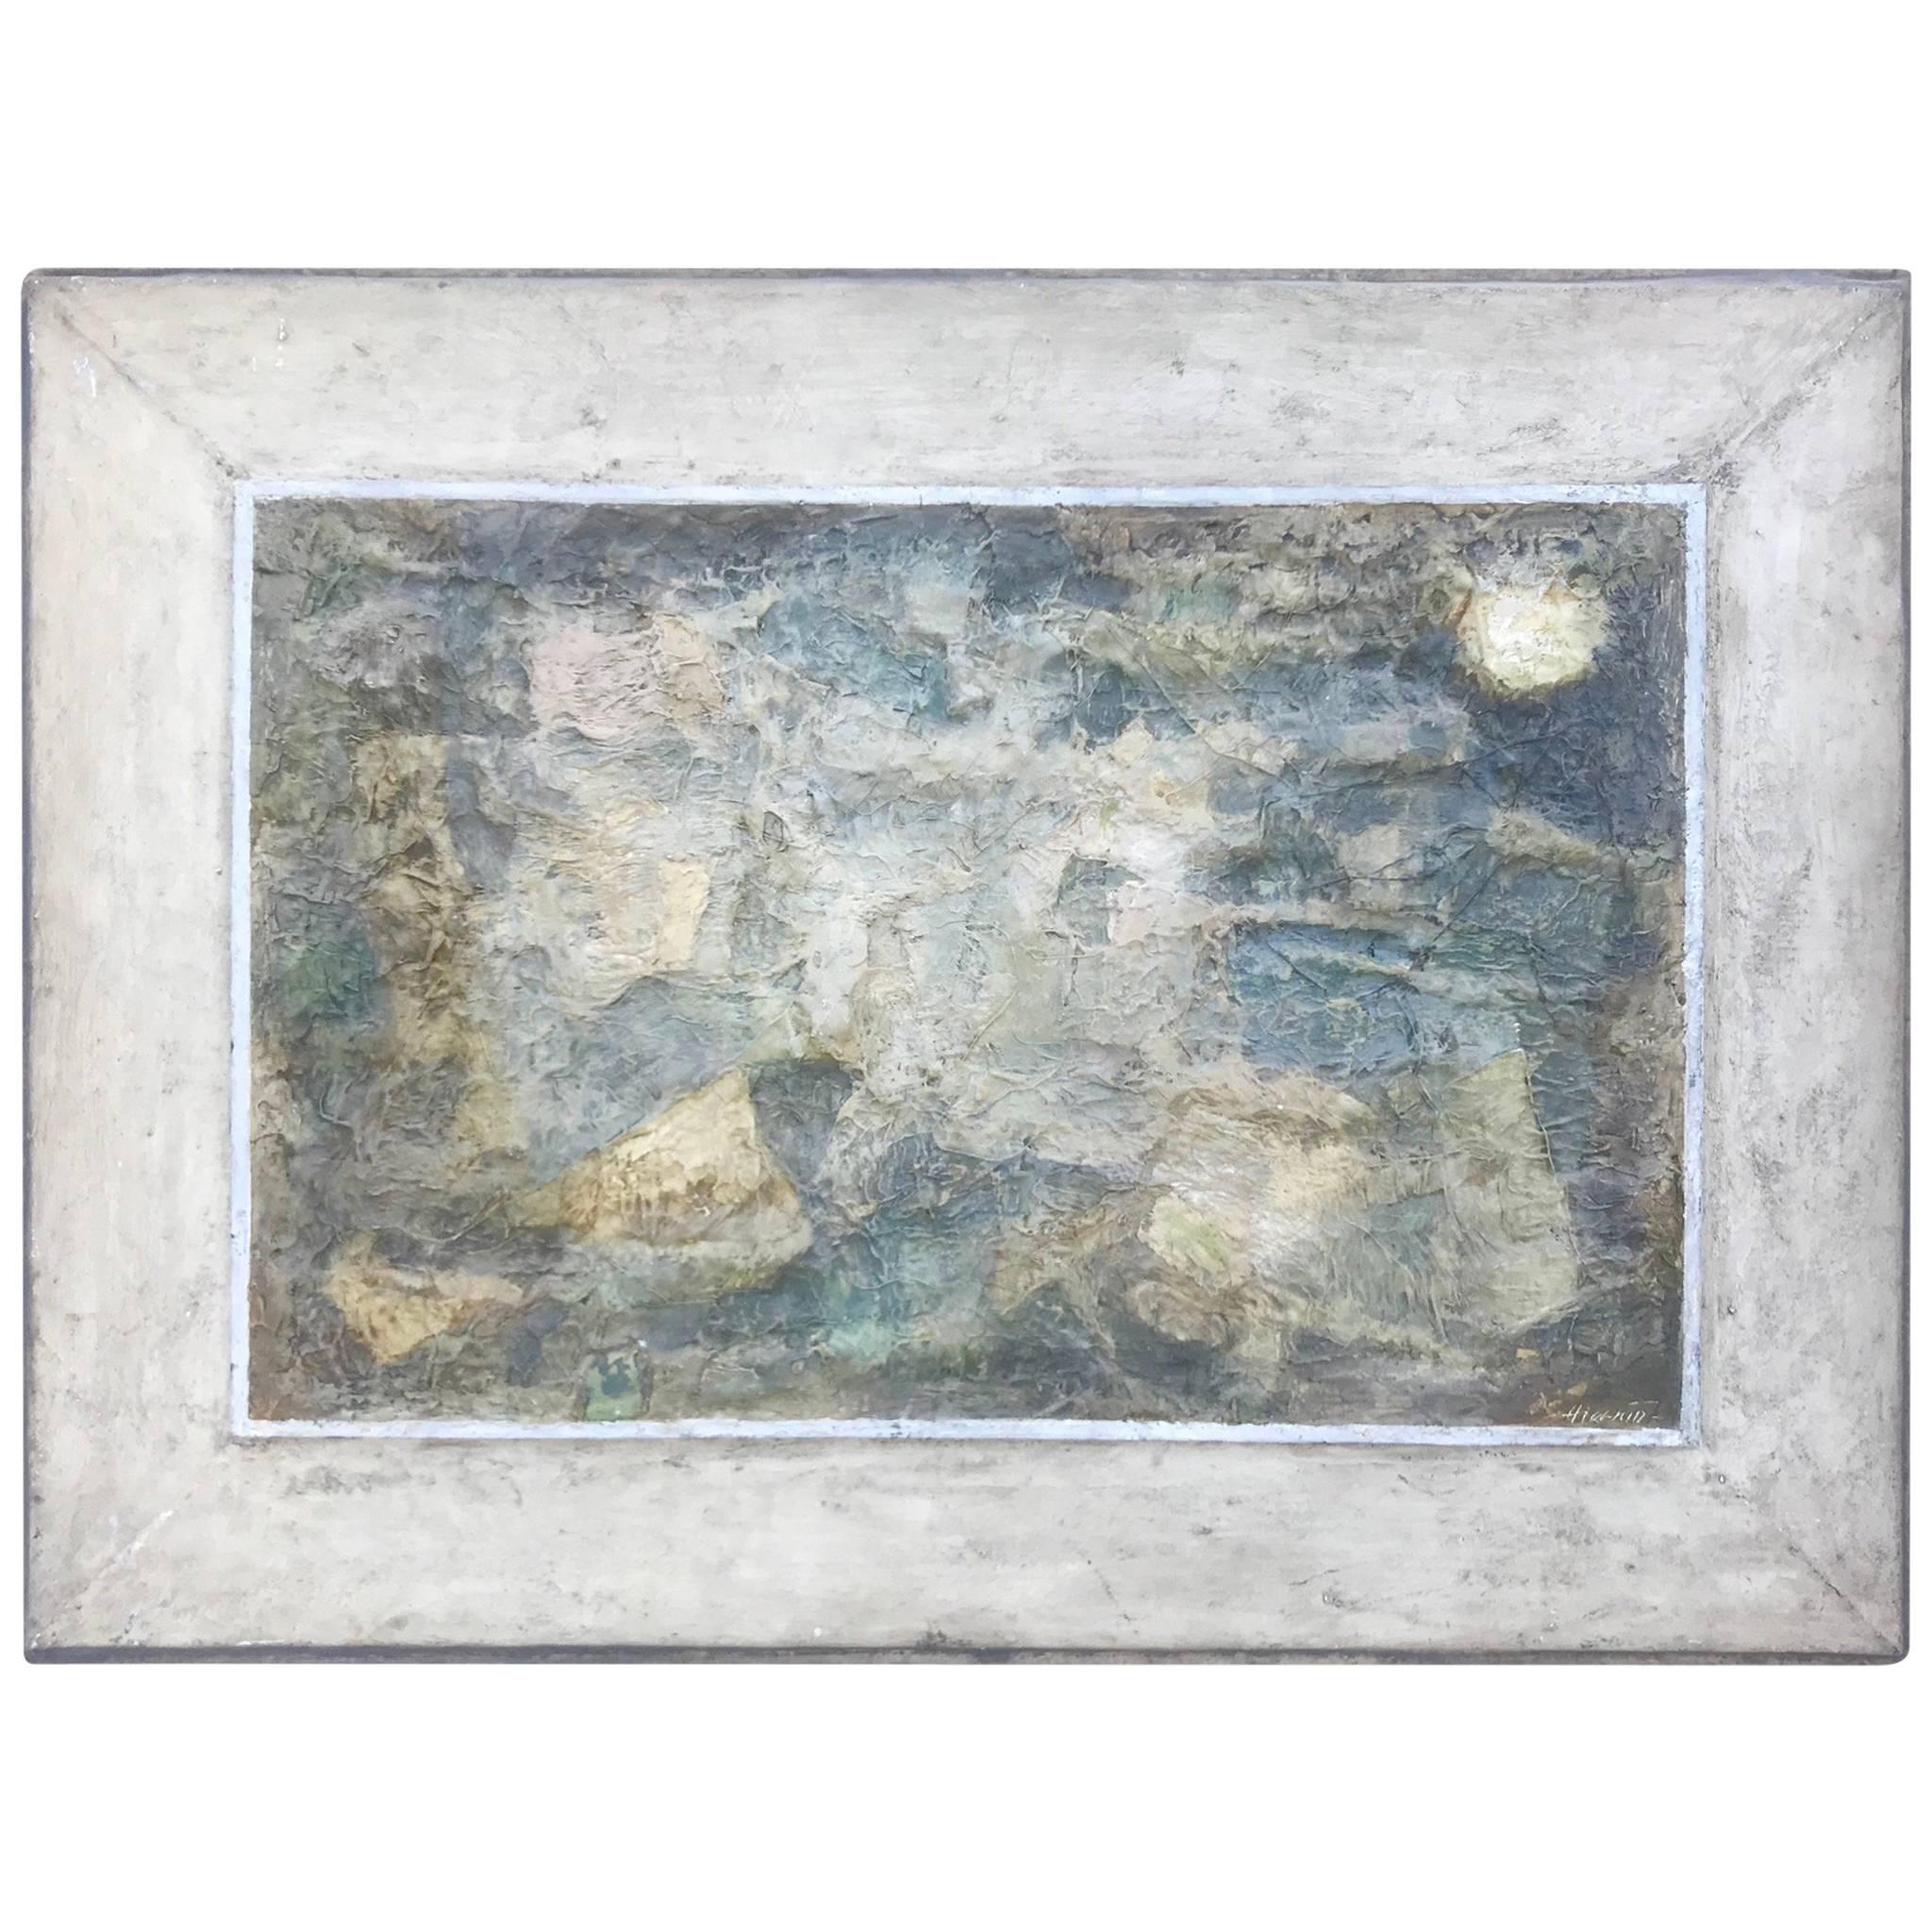 Textural Abstract 1950s American School Painting, L. Hussar For Sale